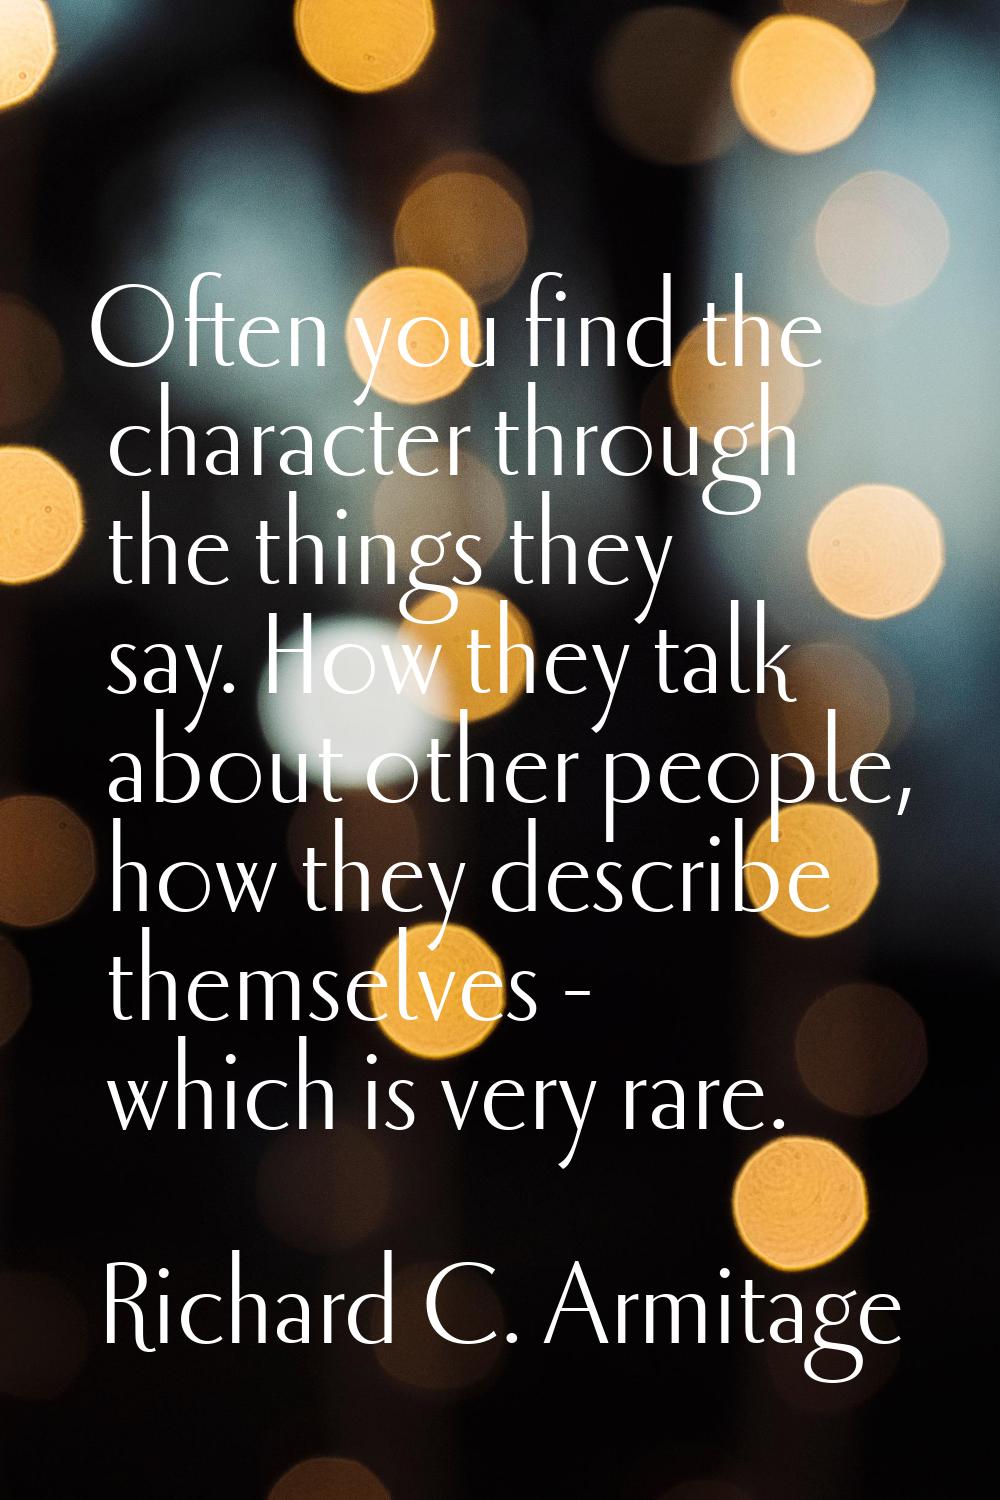 Often you find the character through the things they say. How they talk about other people, how the